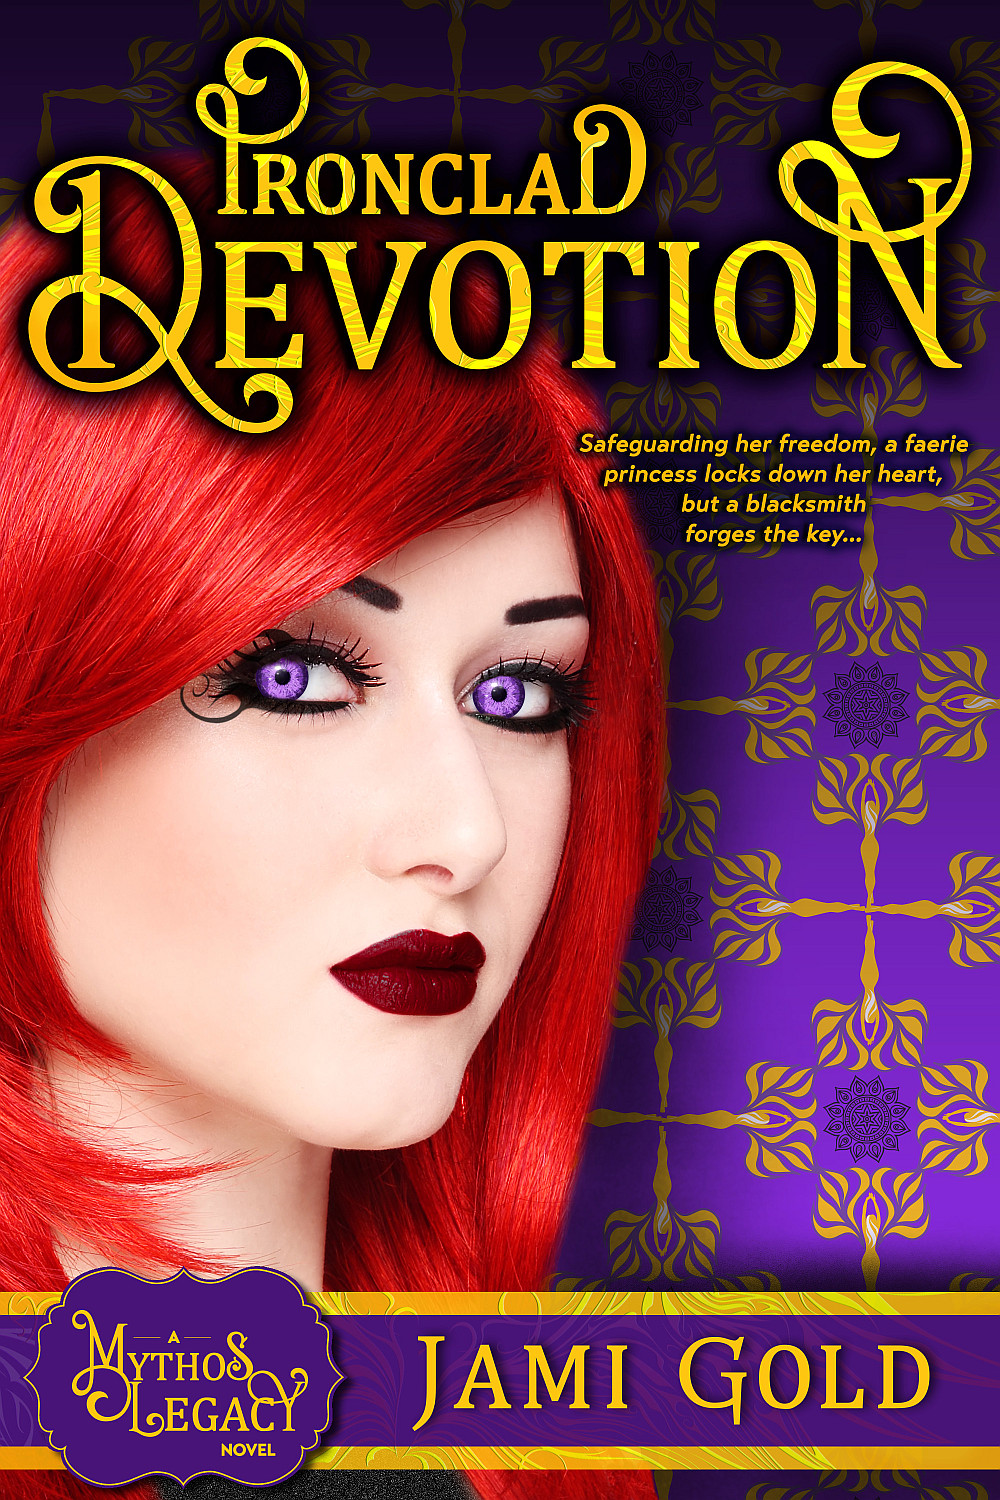 Ironclad Devotion cover: Beautiful vivid-red-haired white woman with striking bright violet eyes, dark red lips, and black swirling lines at her temple stares at viewer against purple background of faerie with wing-like flames and mandala graphics